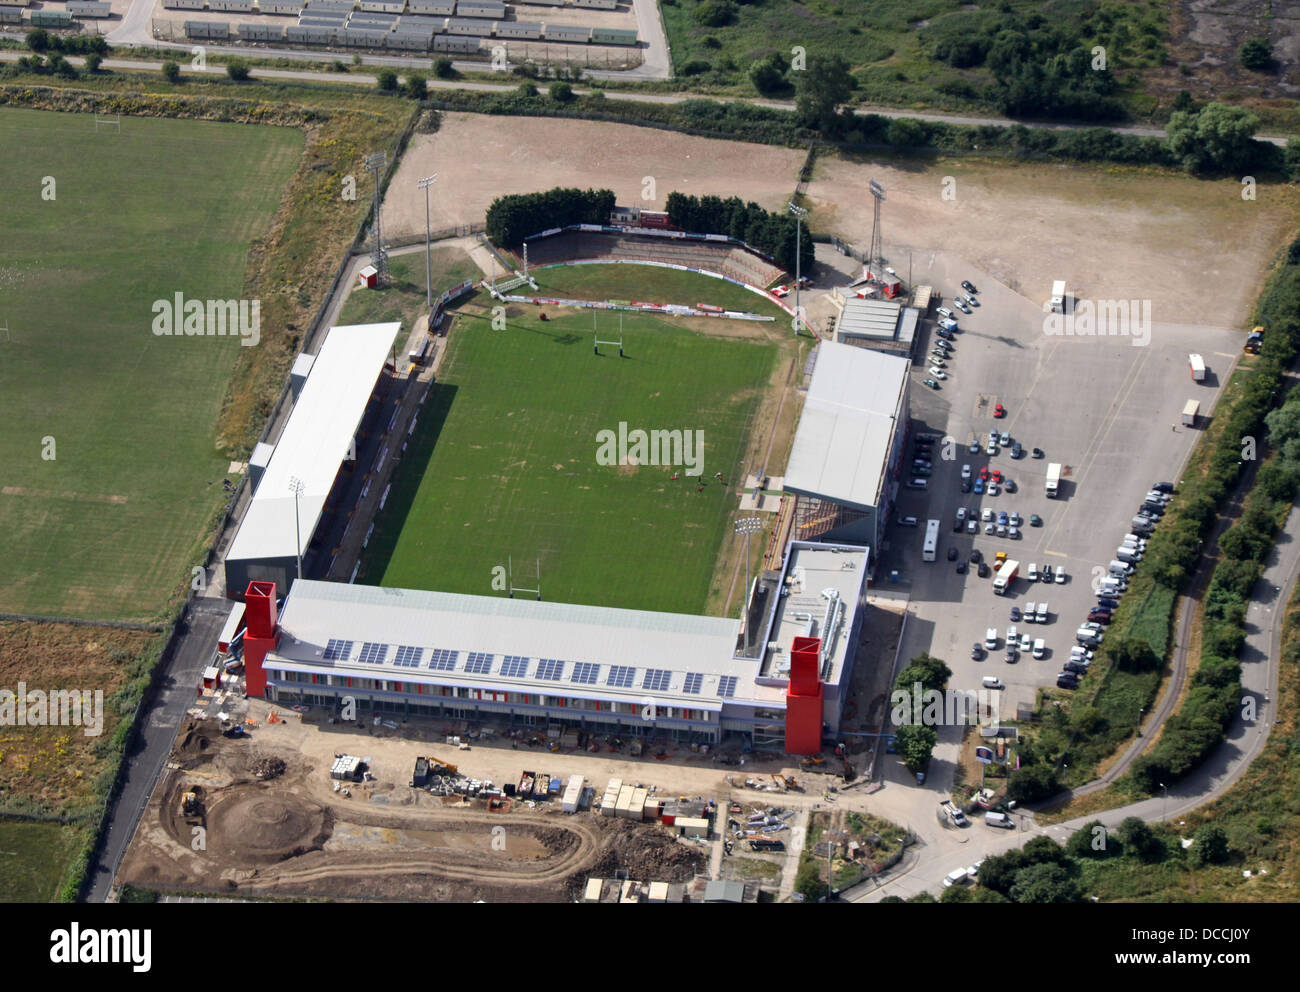 aerial-view-of-hull-kingston-rovers-rugby-league-ground-ms3-craven-DCCJ0Y.jpg